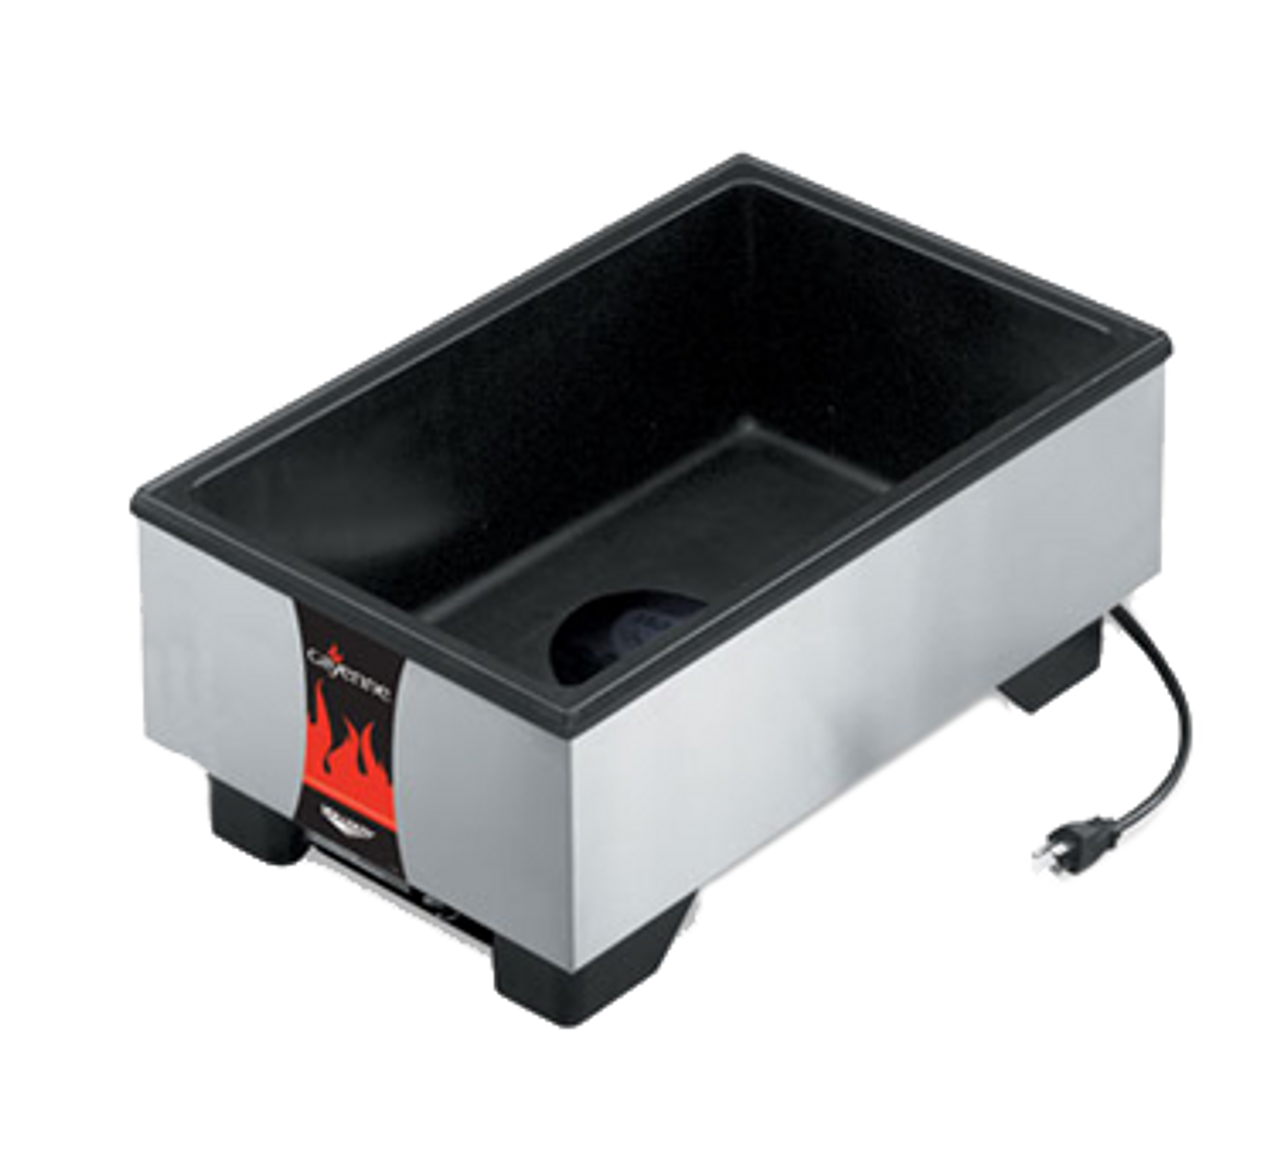 Cayenne® Food Warmer, countertop, full size, 13-3/4"W x 21-3/4"D x 9"H, 6" deep well, recessed controls, capillary tube thermostat, dome heating element, low-water indicator light, black interior, stainless steel exterior, non-skid feet, 120v/60/1-ph, 700 watts, 5.8 amps, cord, NEMA 5-15P, cULus, NSF, Made in USA